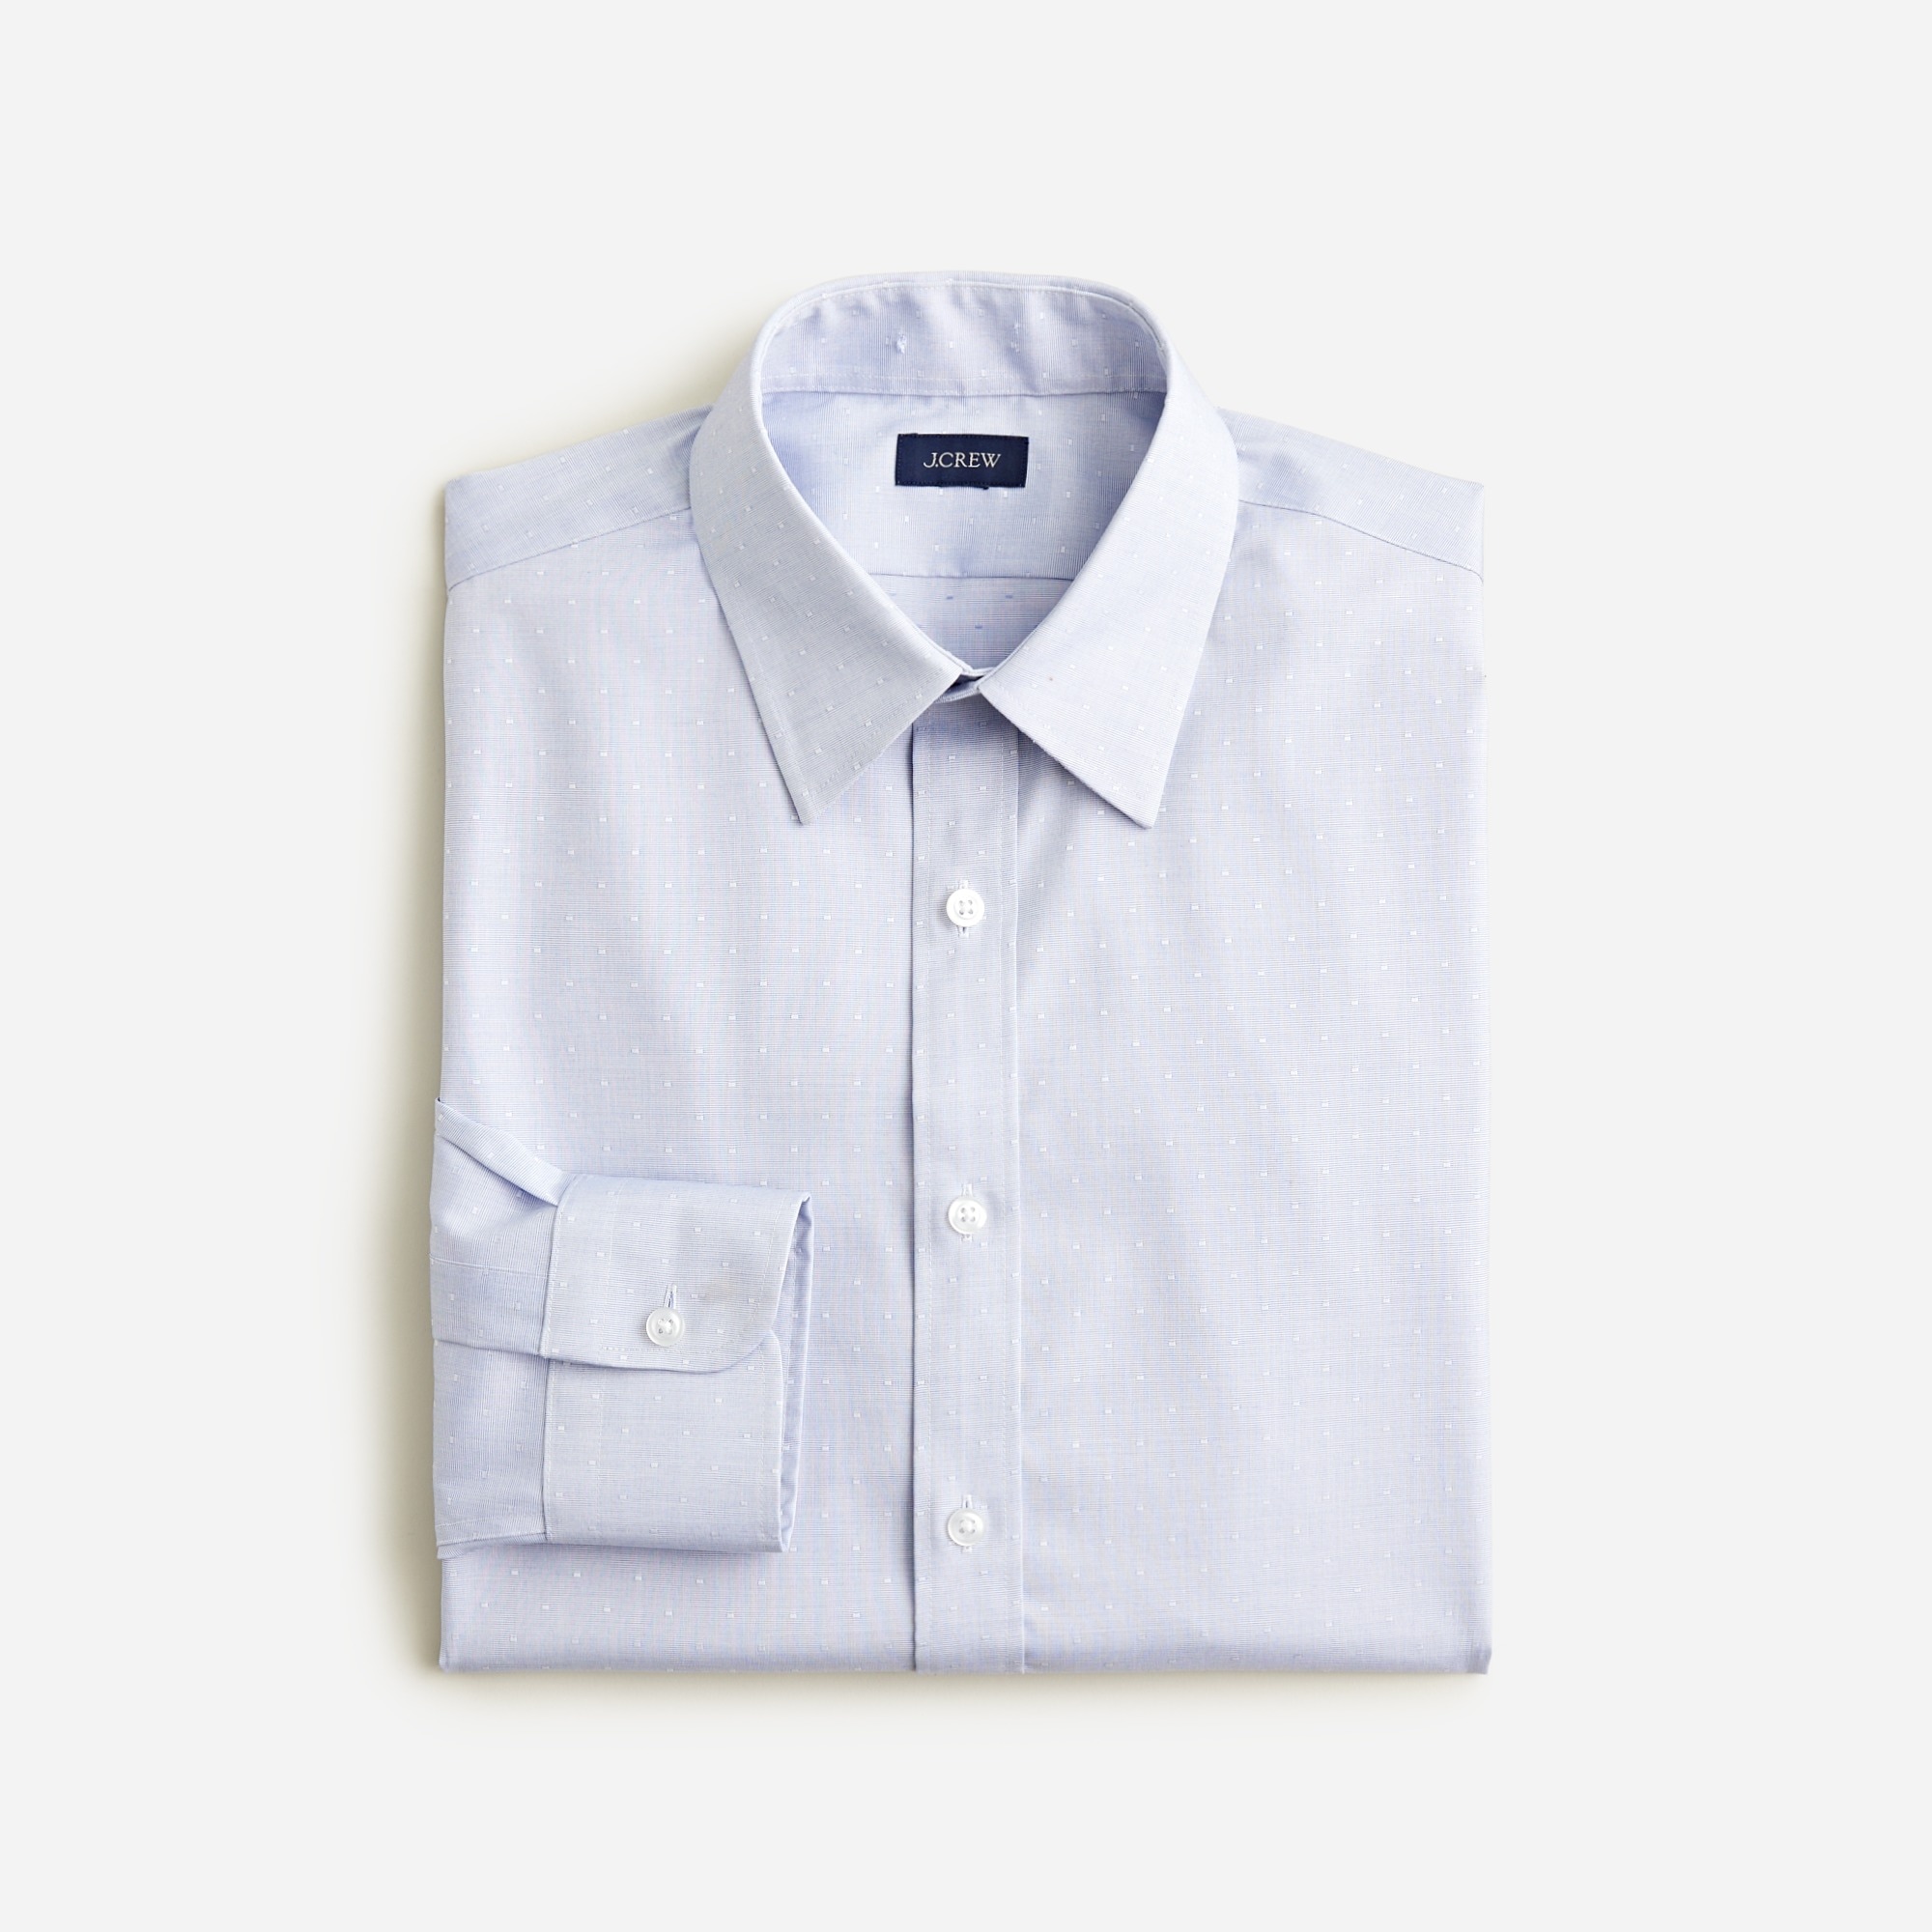  Bowery wrinkle-free dobby dress shirt with point collar